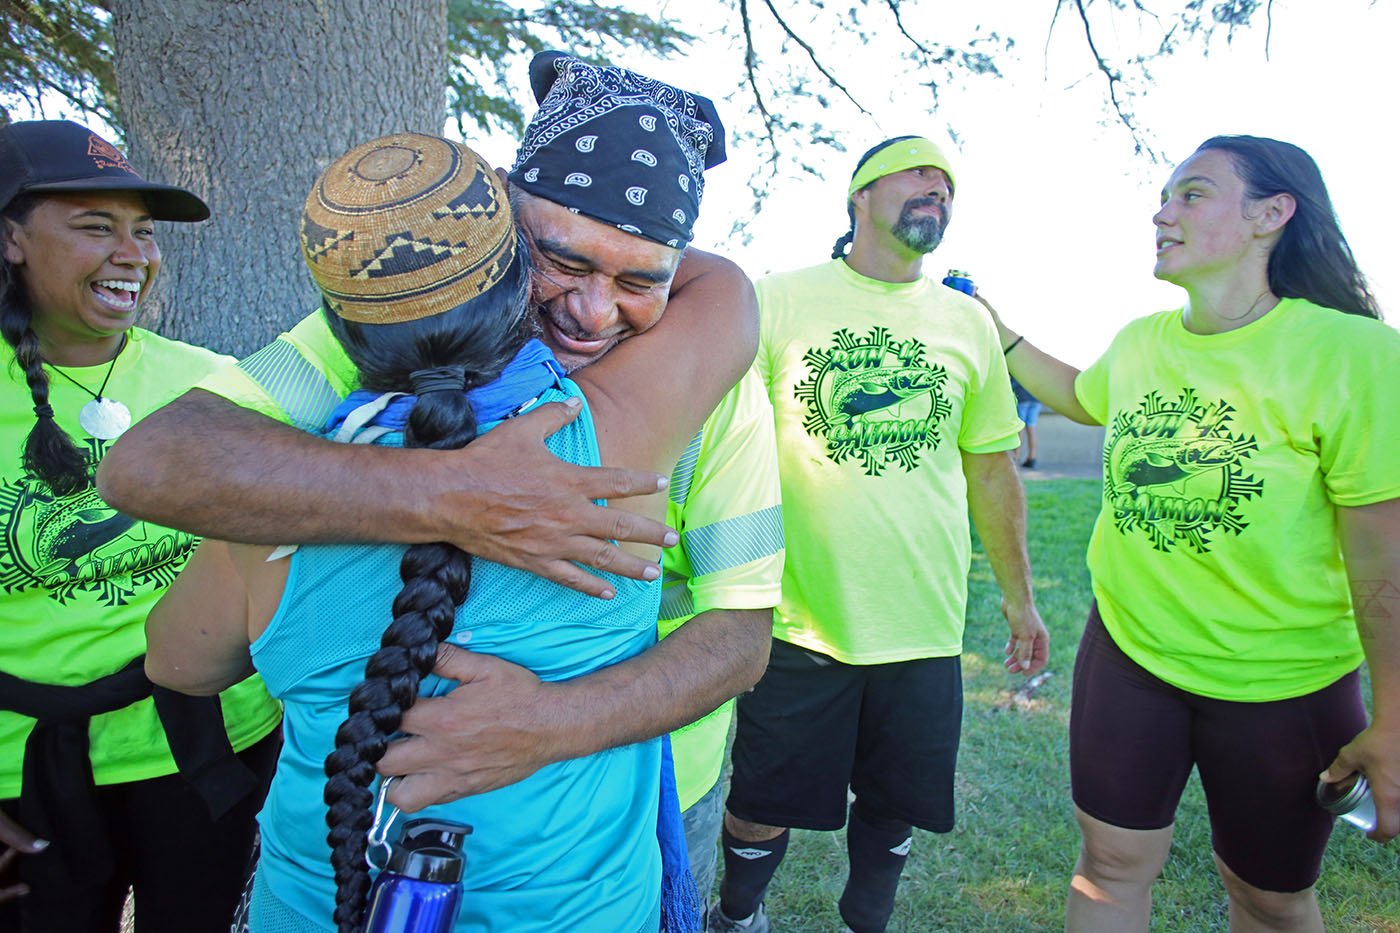  Shasta Lake, CA — After the runners arrive, a happy Chief Caleen Sisk hugs Gary Thomas, an Elem Pomo ceremonial song leader from Lake County. September 25, 2019. Tom Levy/The Spiritual Edge 